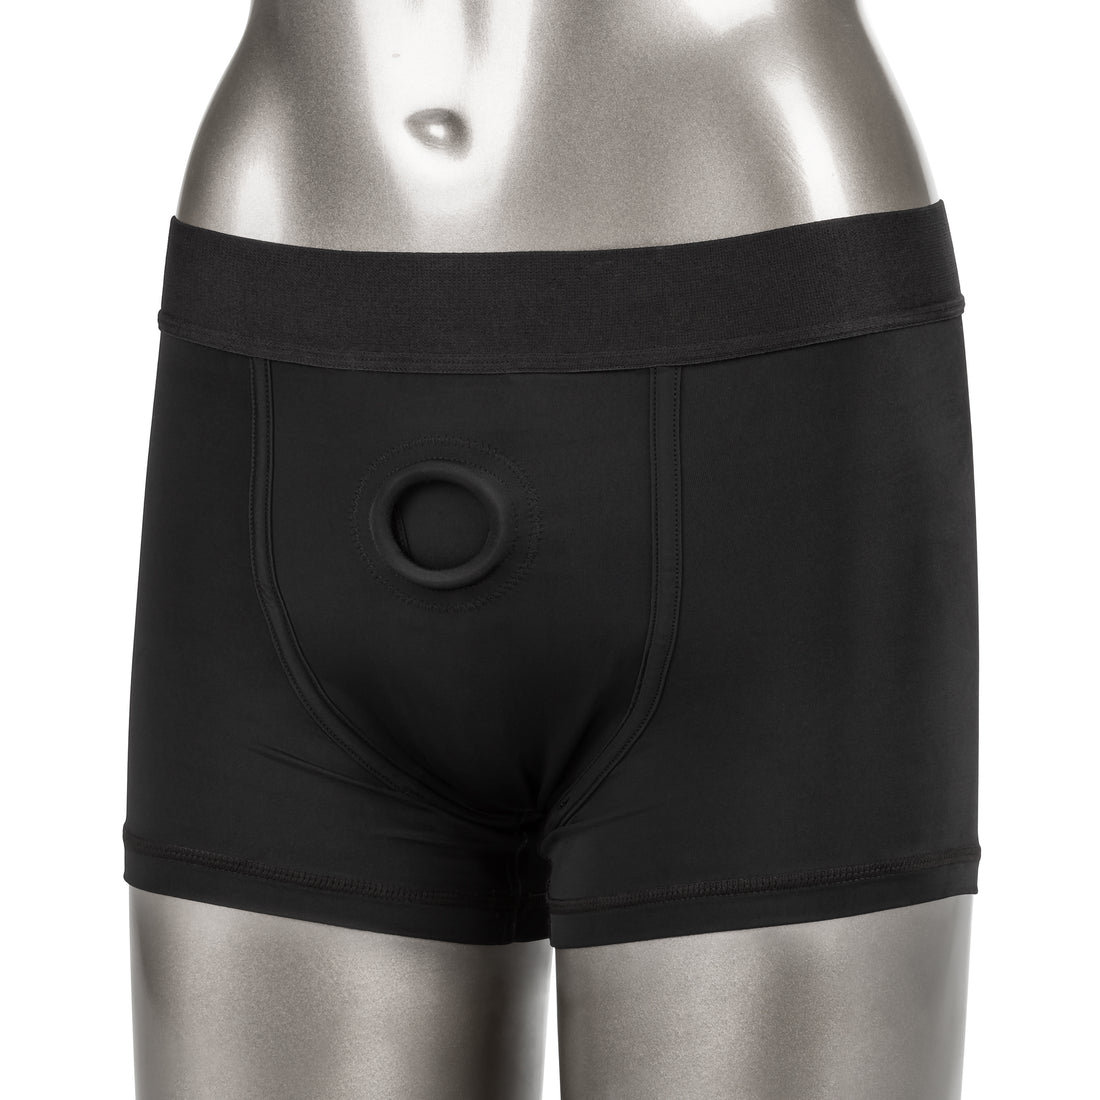 Her Royal Harness Boxer Brief - S/m SE1560103